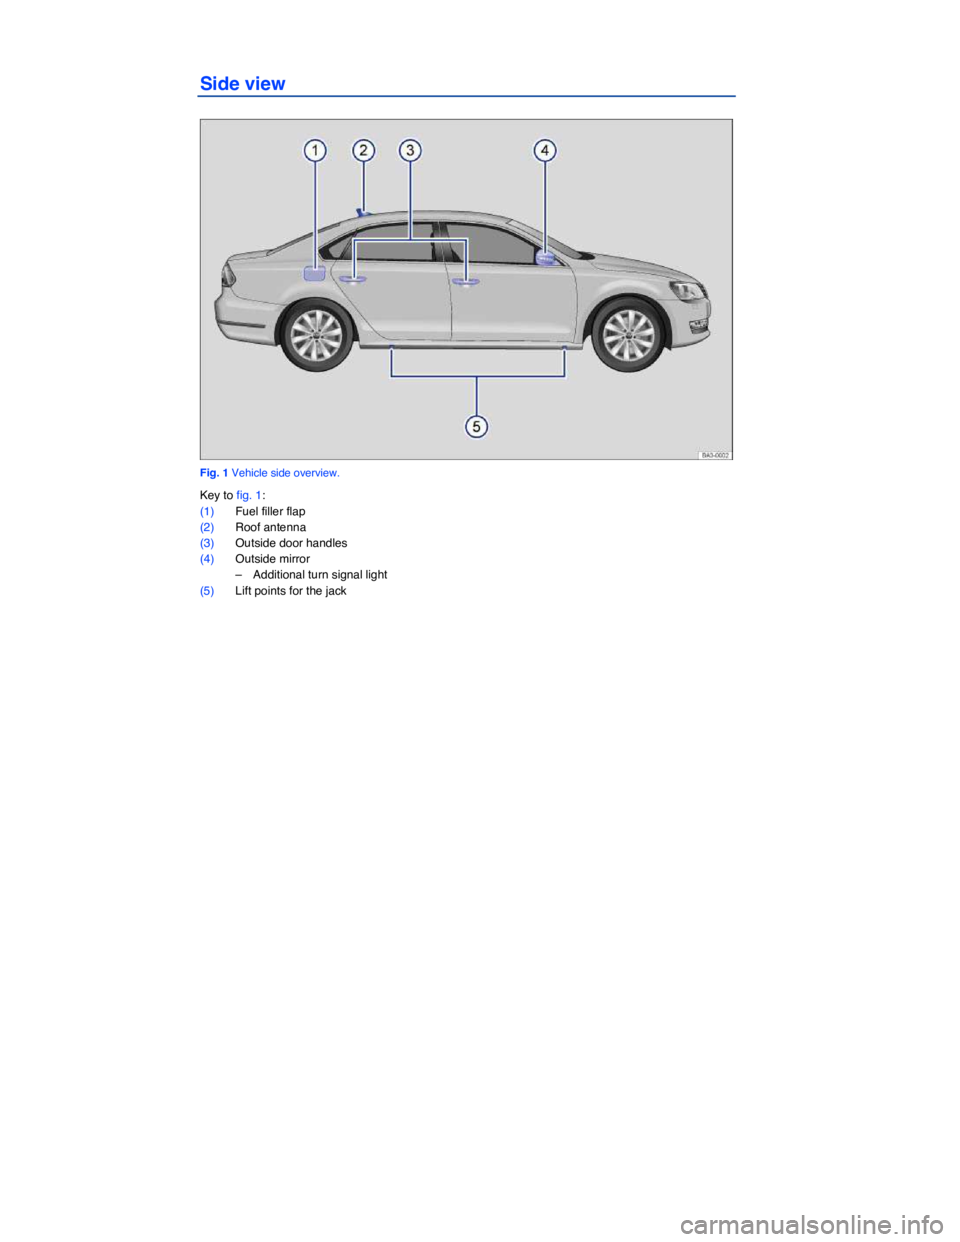 VOLKSWAGEN PASSAT 2008  Owners Manual  
Side view 
 
Fig. 1 Vehicle side overview. 
Key to fig. 1: 
(1) Fuel filler flap  
(2) Roof antenna  
(3) Outside door handles  
(4) Outside mirror  
–  Additional turn signal light  
(5) Lift poi